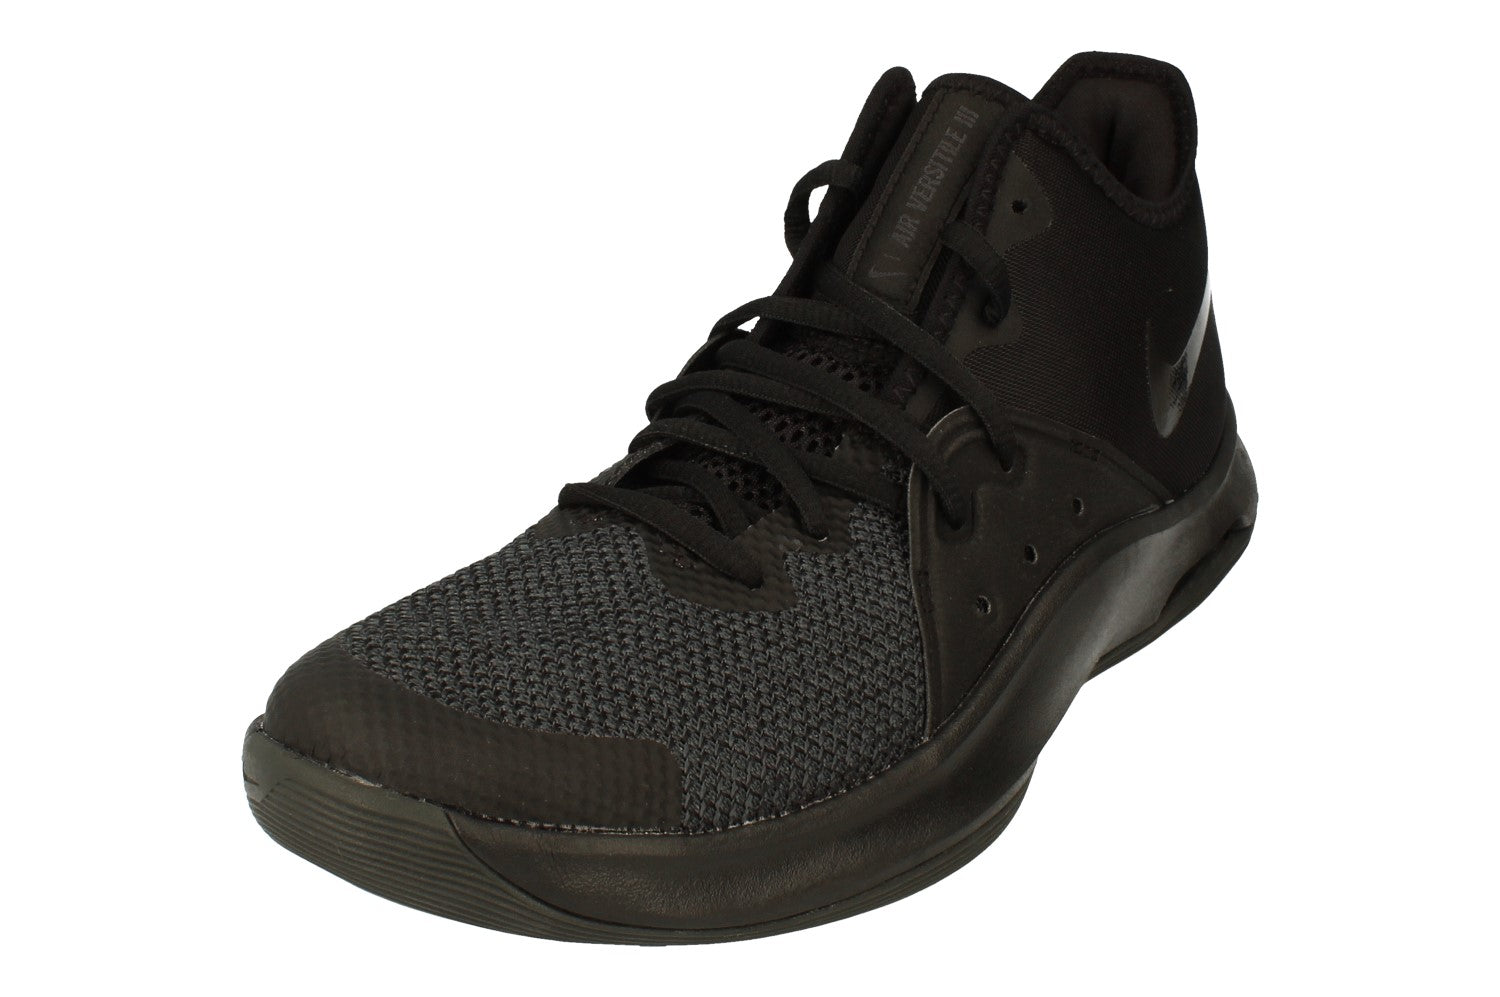 NIKE AIR VERSITILE III BLACKOUT For, 41% OFF